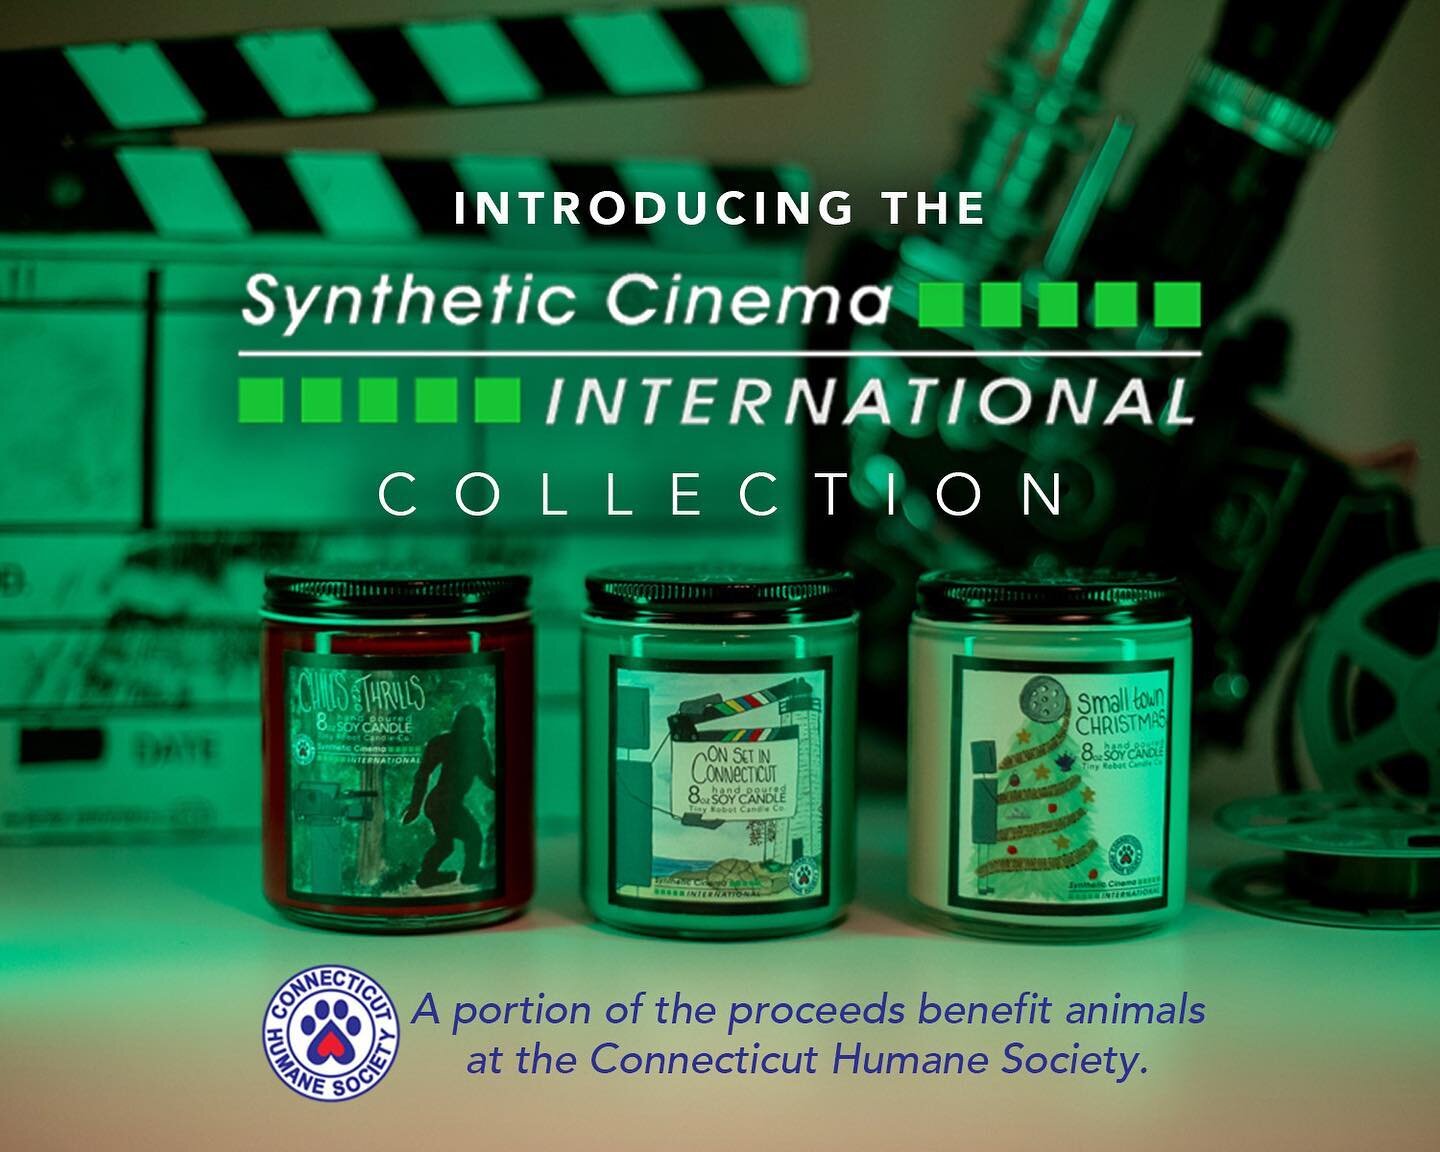 ✨🎬LIGHTS! CAMERA! ACTION! 🎥✨
We're ecstatic to announce or very first major collaboration with our friends at Synthetic Cinema International, a Connecticut based production company. Together we're release the Synthetic Cinema International Collecti